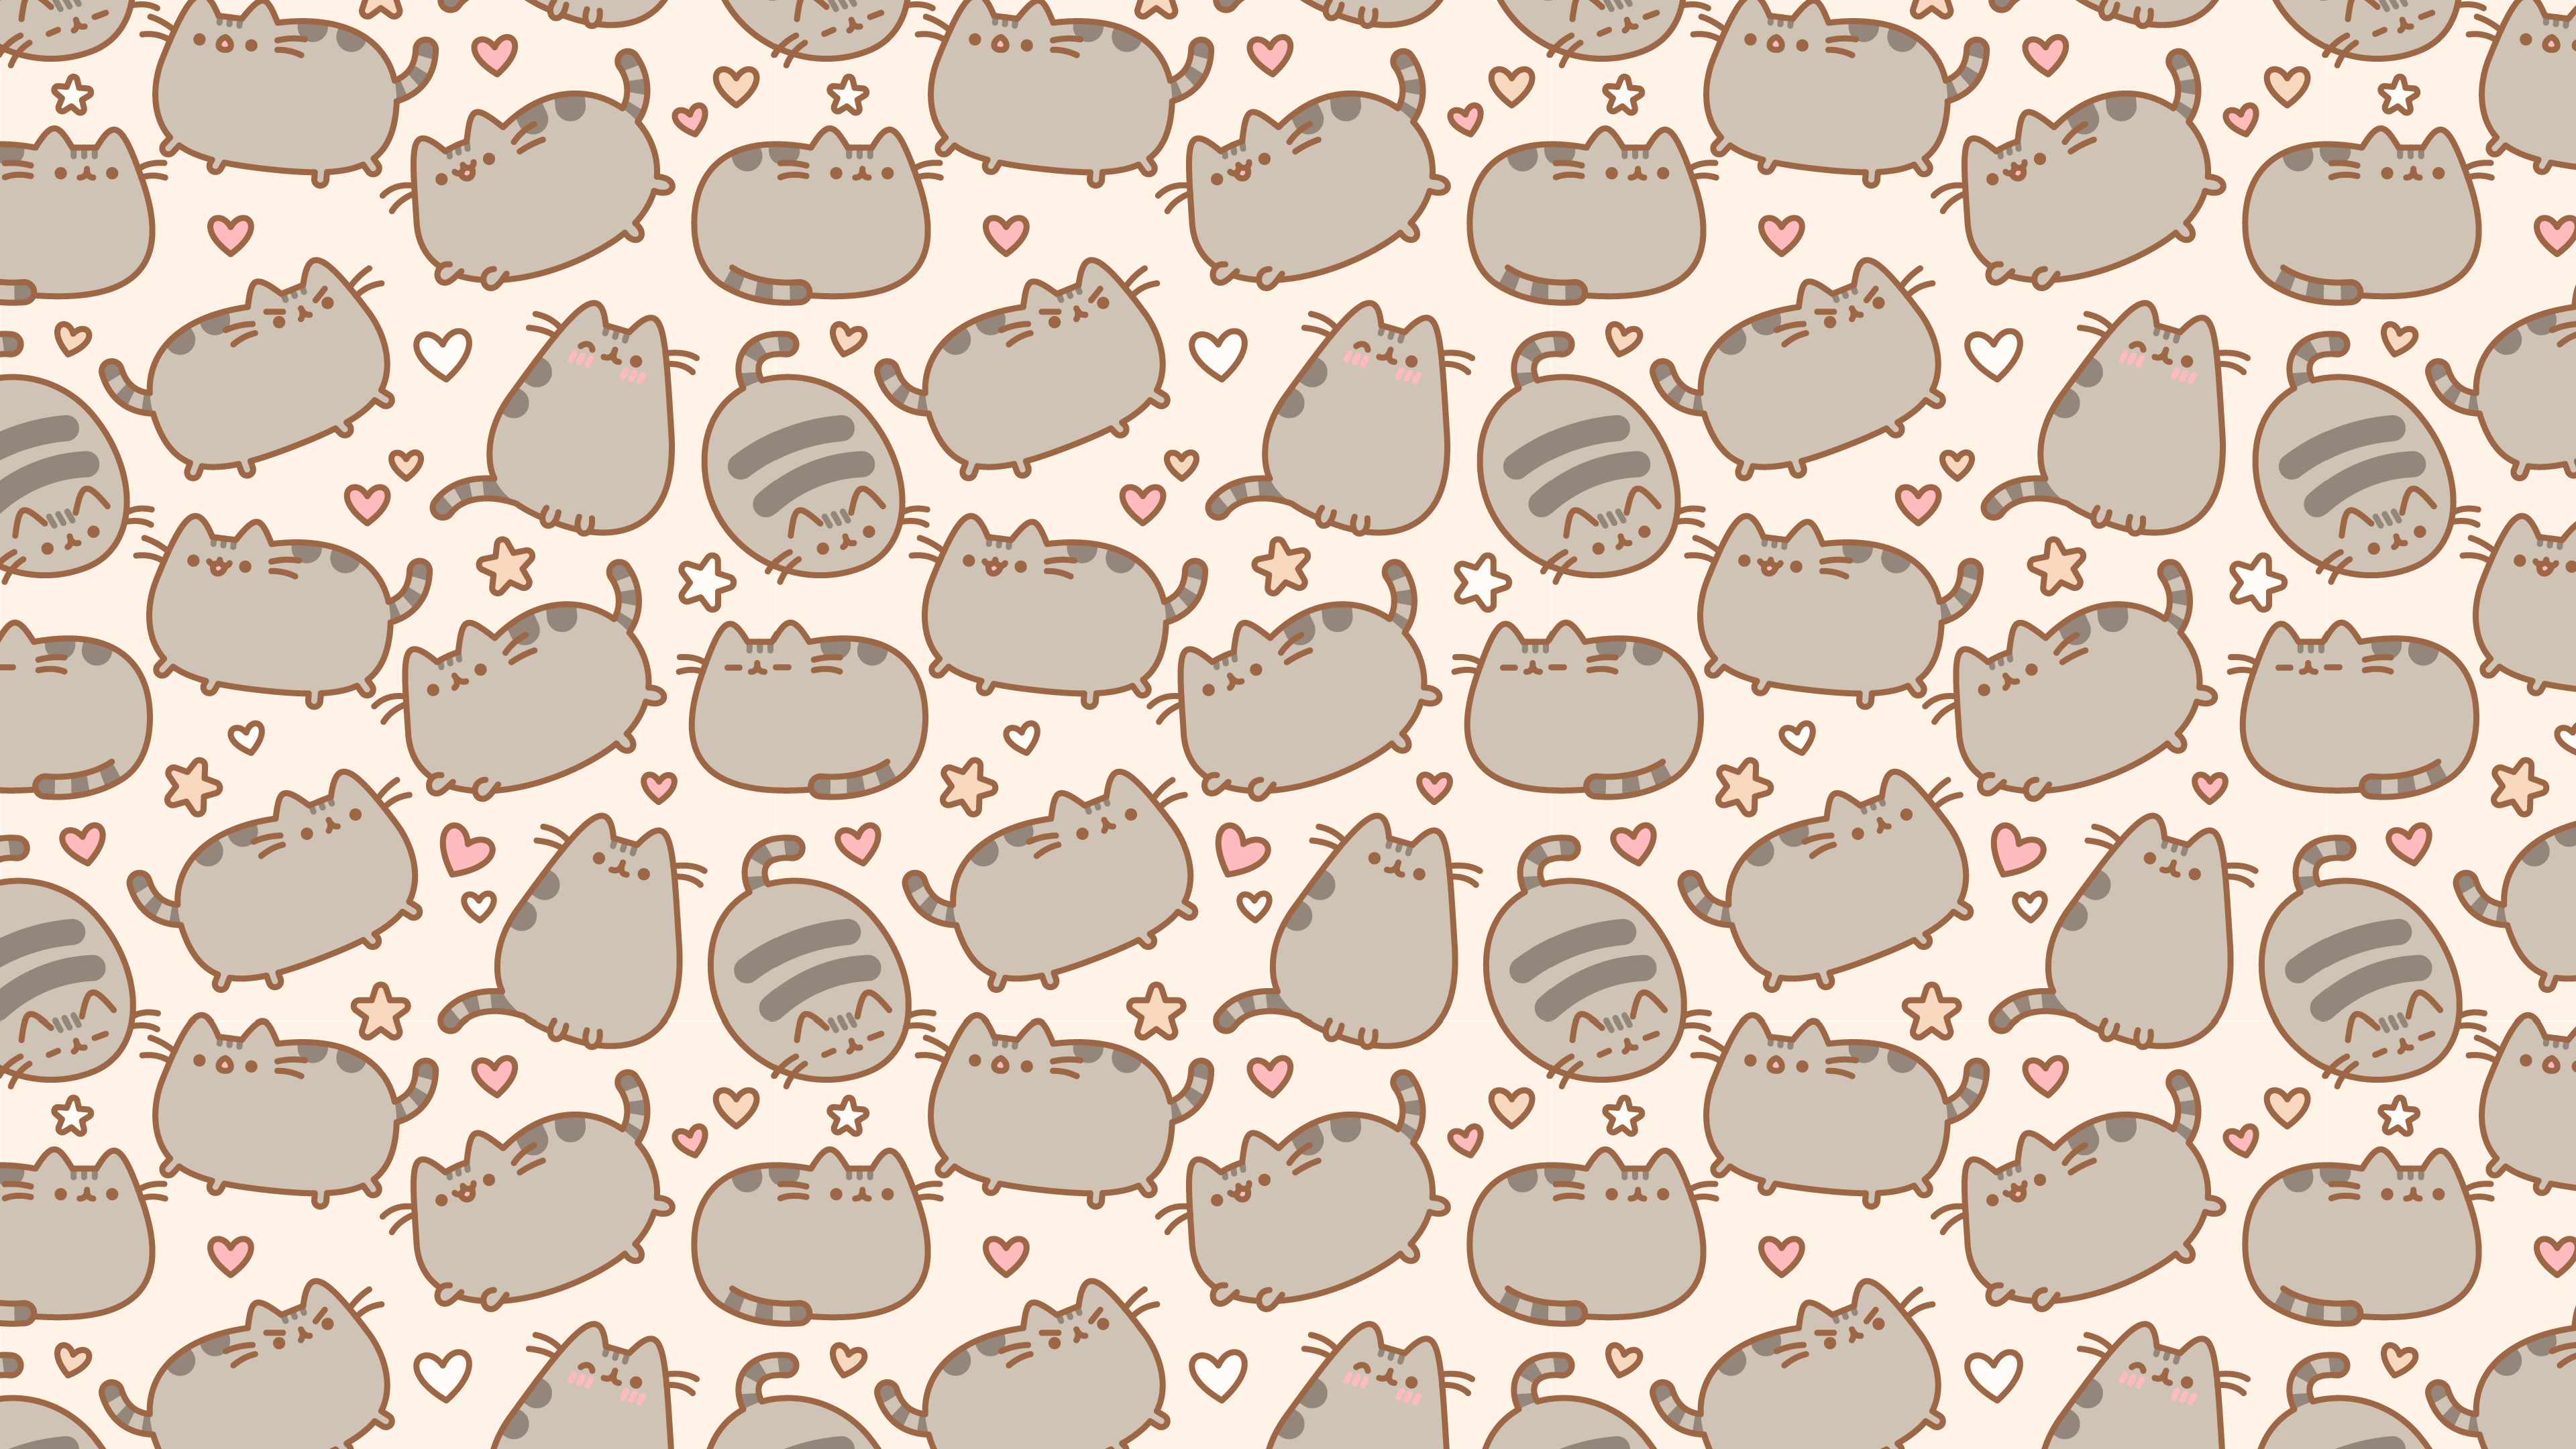 Pusheen the cat HD Wallpaper and Background